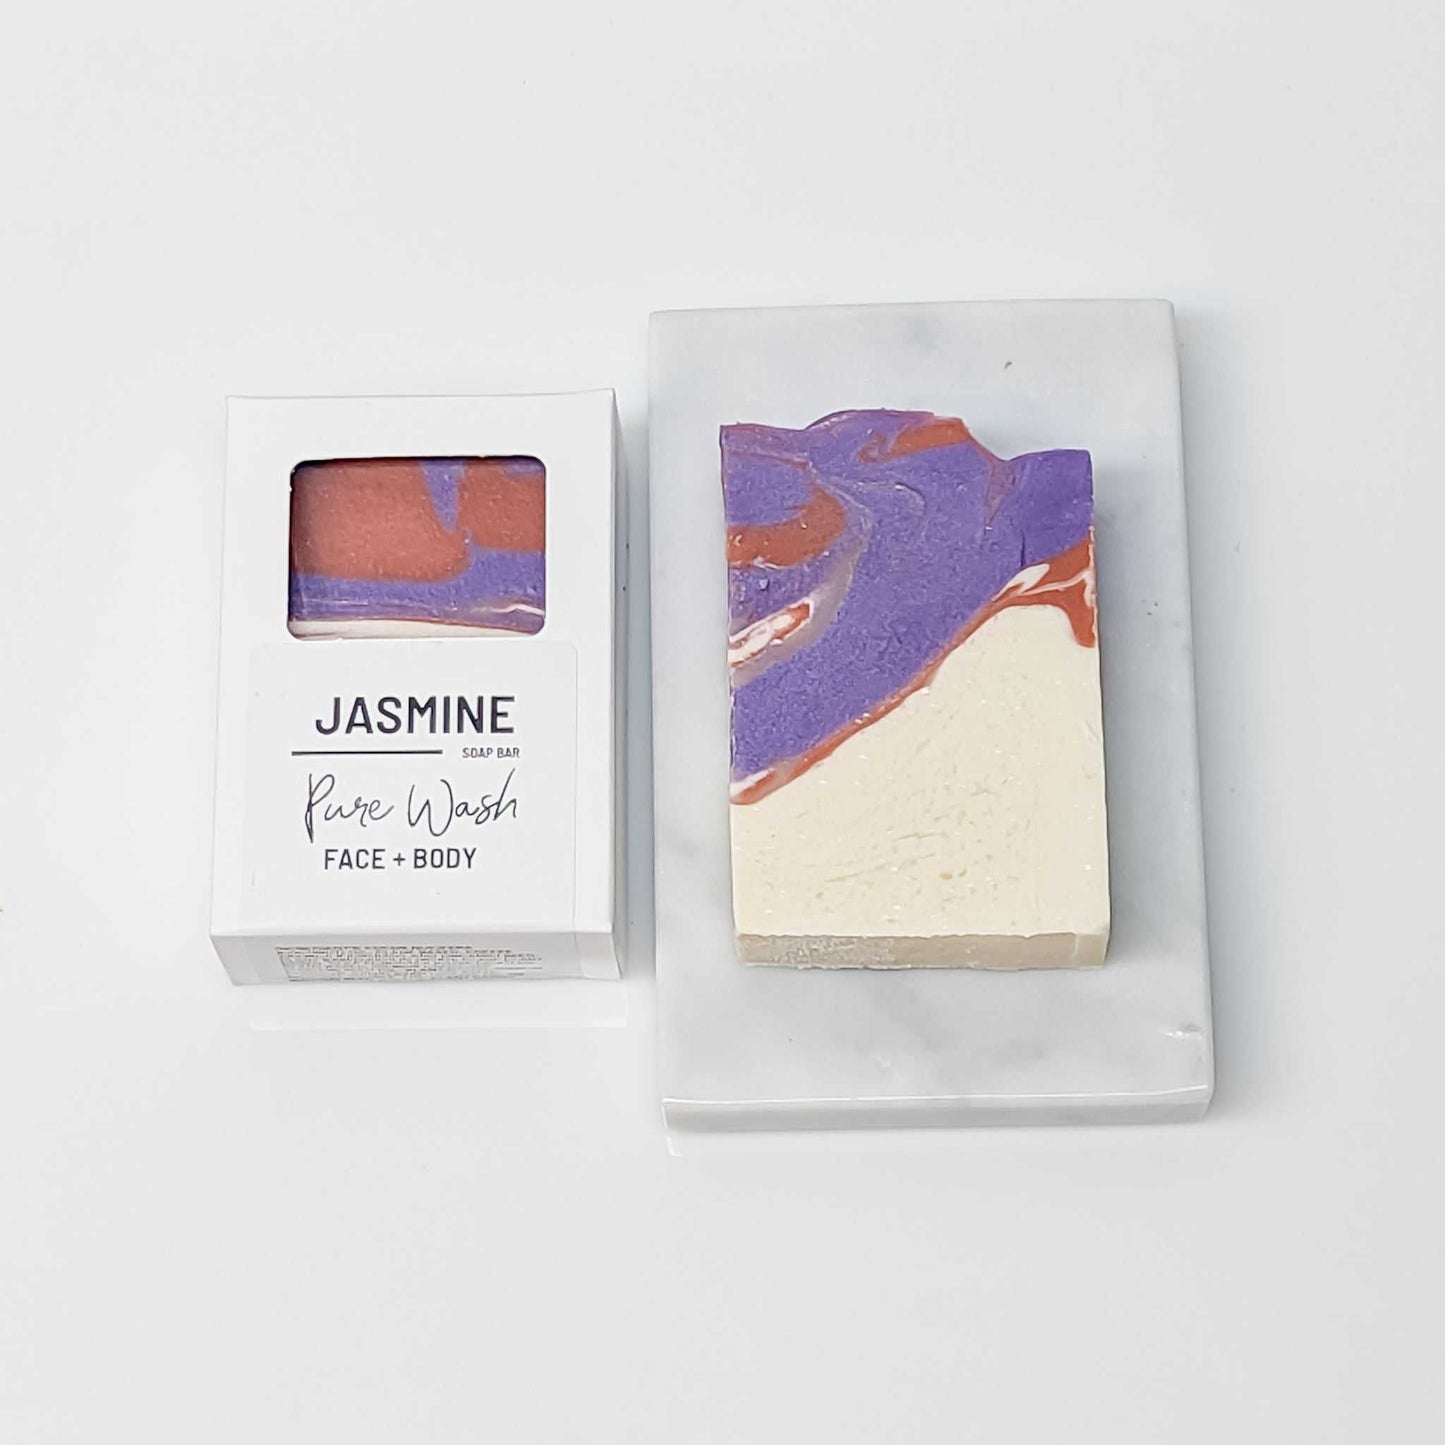 Delightful relaxation awaits: Experience a spa-like retreat with our luxurious Jasmine Soap Bar | CG Pure Wash